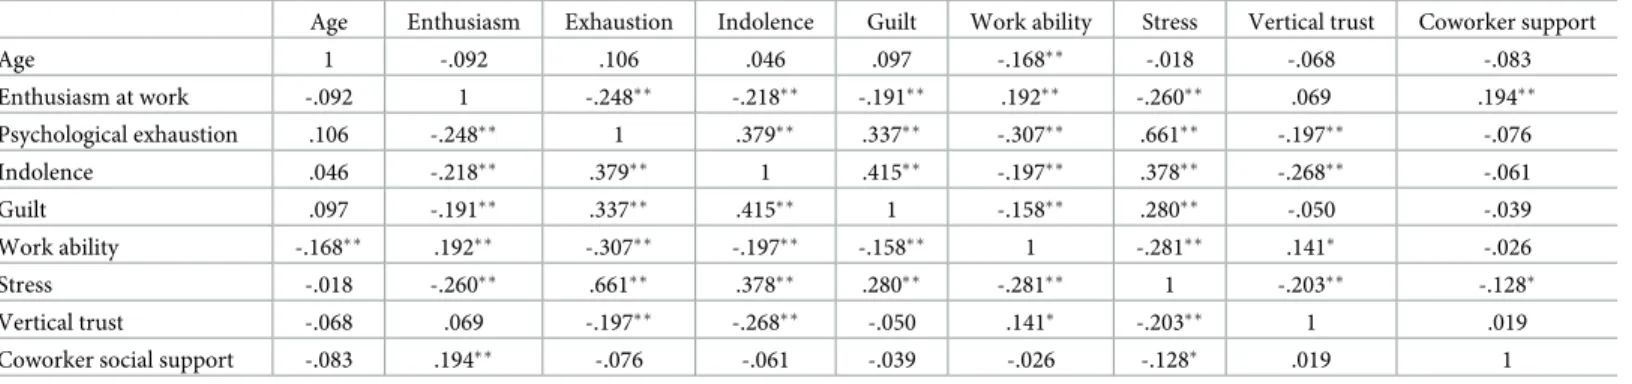 Table 1. Correlations between variables.